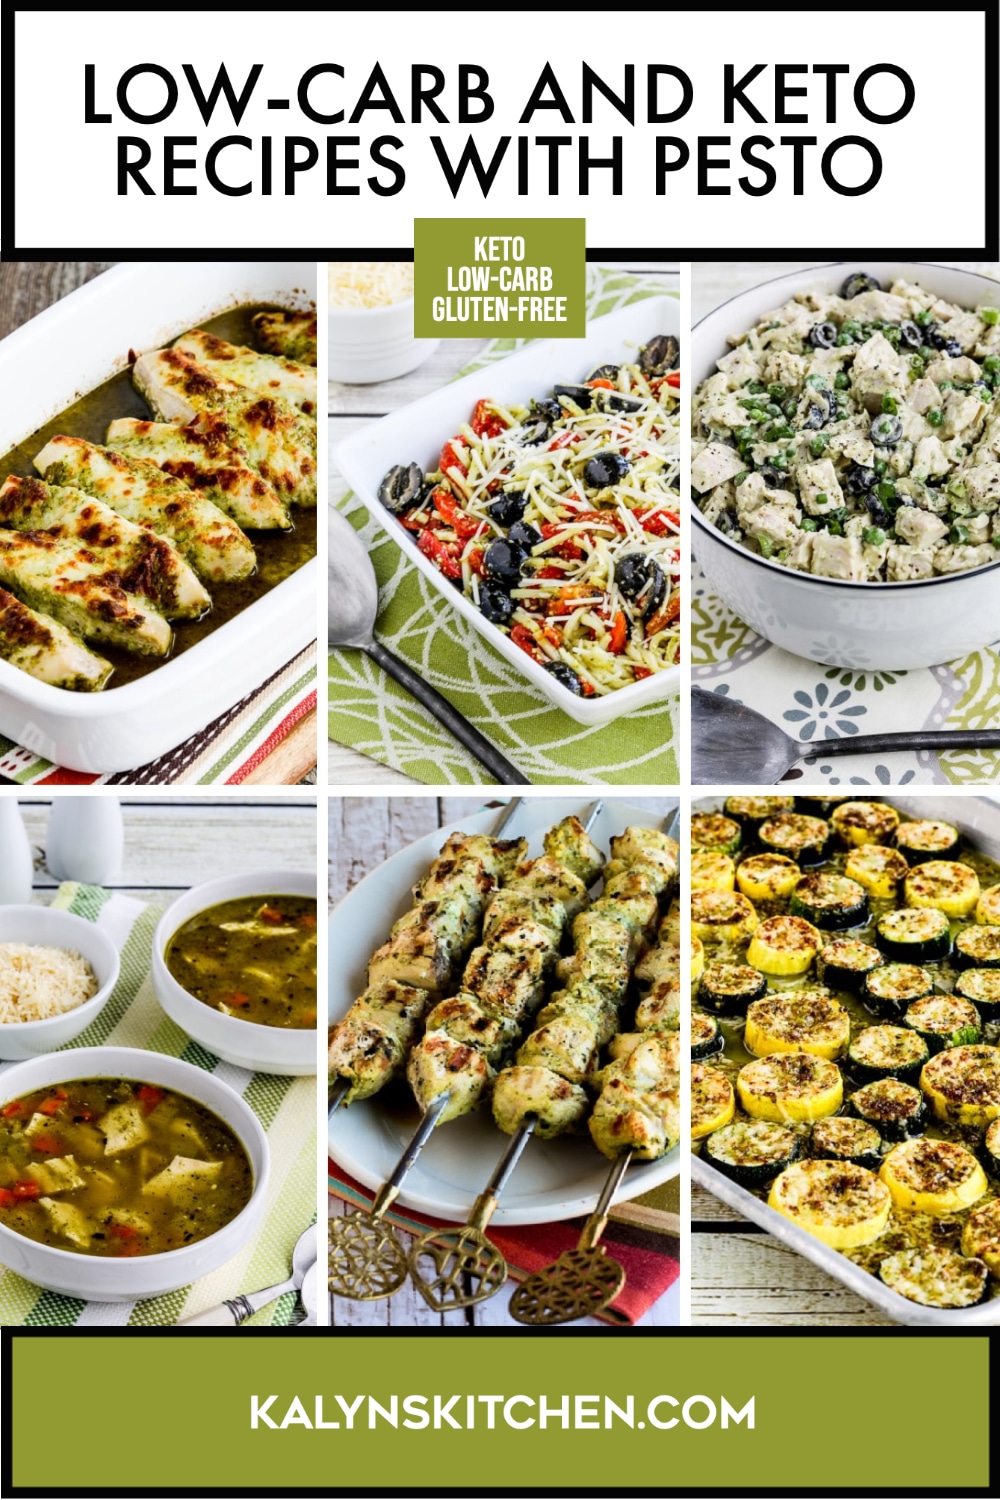 Pinterest image of Low-Carb and Keto Recipes with Pesto